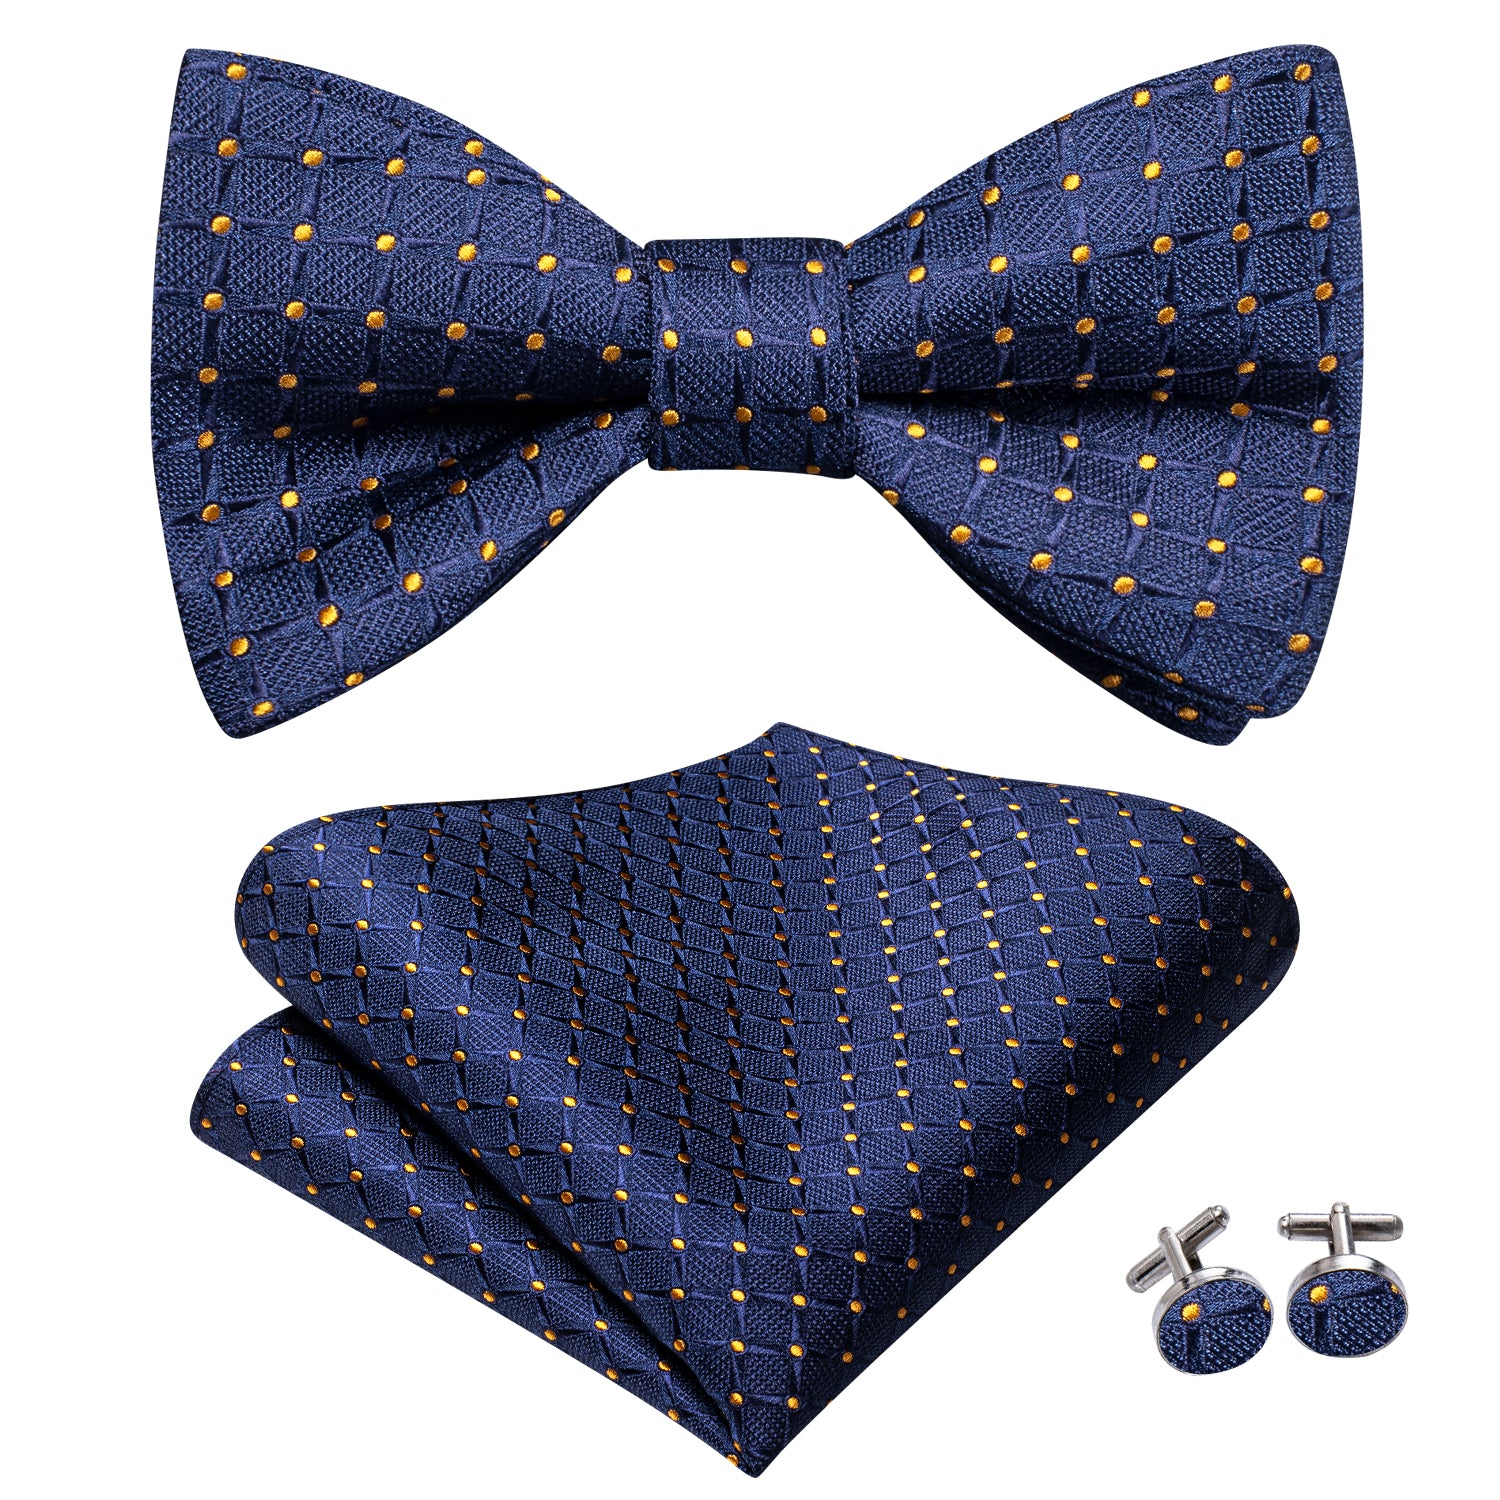 Bowtie and Pocket Square Sets